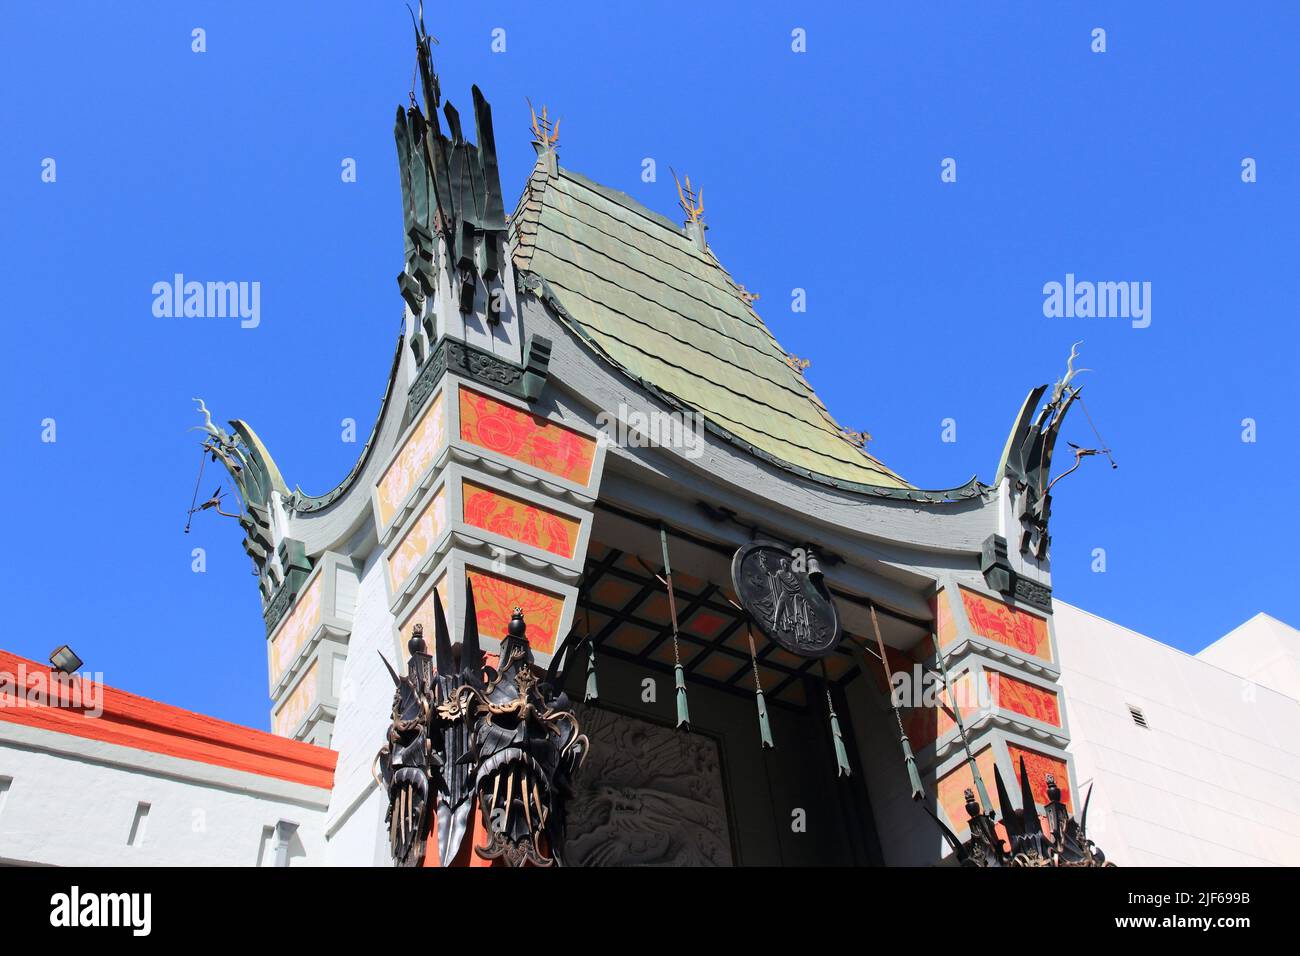 LOS ANGELES, USA - APRIL 5, 2014: TCL Chinese Theatre in Hollywood. Formerly Grauman's Chinese Theatre, the famous landmark dates back to 1926. Stock Photo